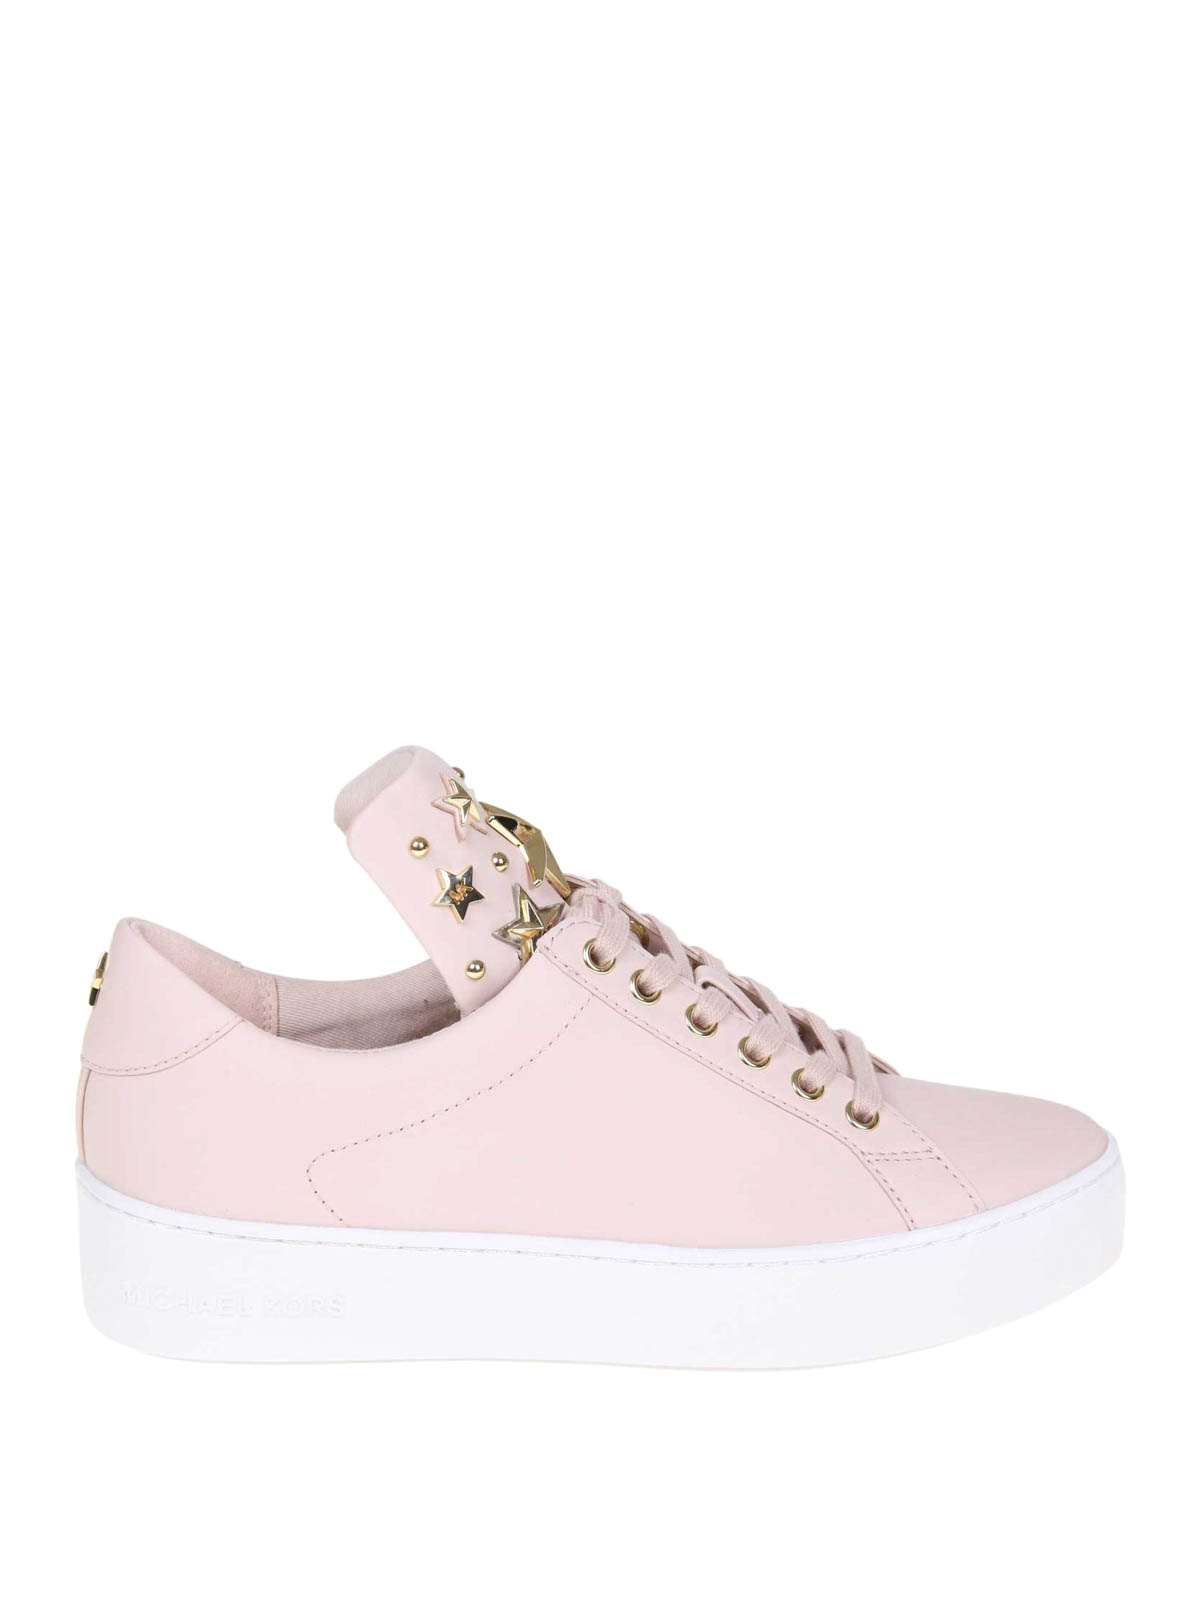 Trainers Michael Kors - Mindy pink leather sneakers - 43R9MNFS6L187